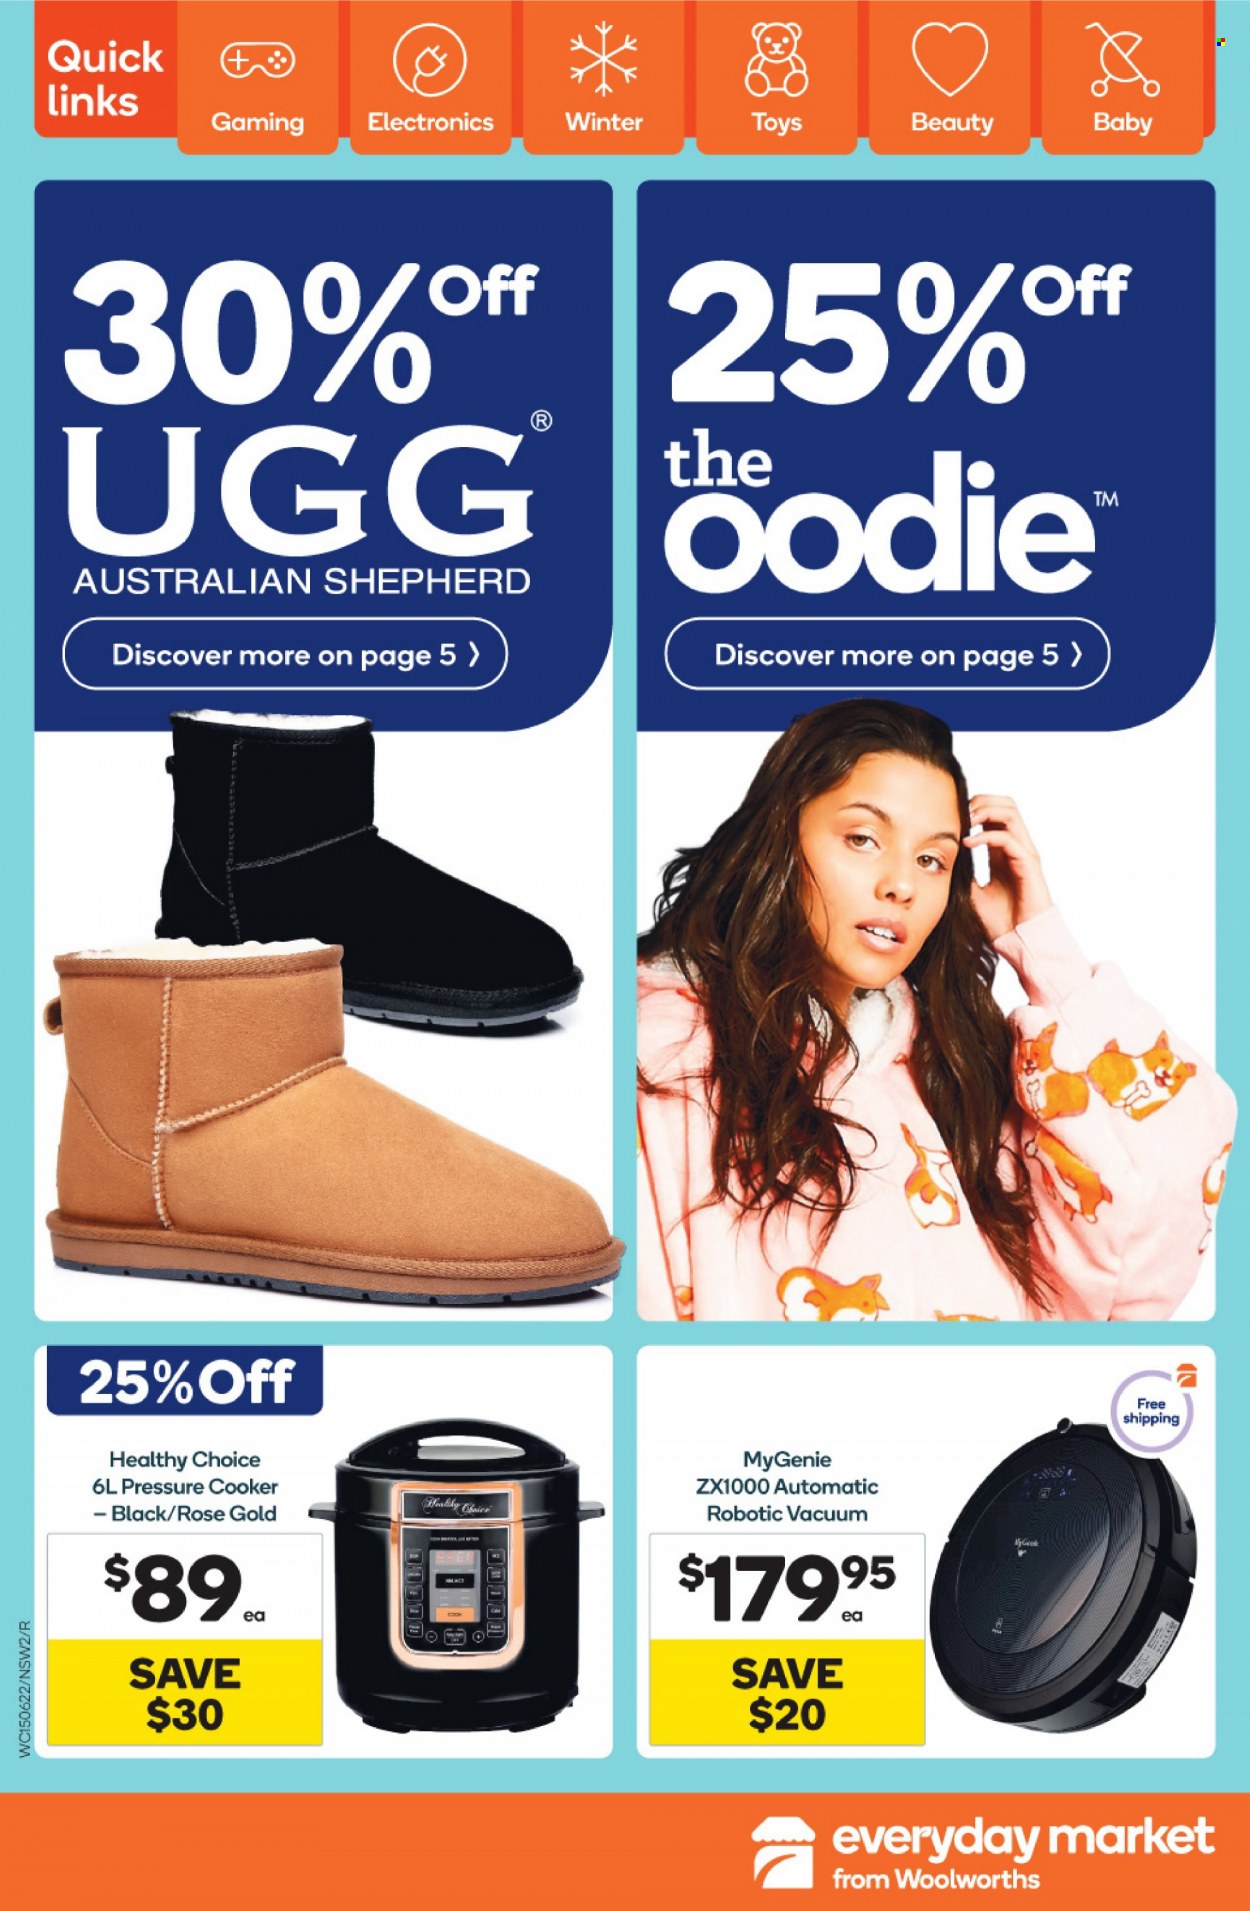 thumbnail - Woolworths Catalogue - 15 Jun 2022 - 30 Jun 2022 - Sales products - Healthy Choice, wine, pressure cooker, toys. Page 2.